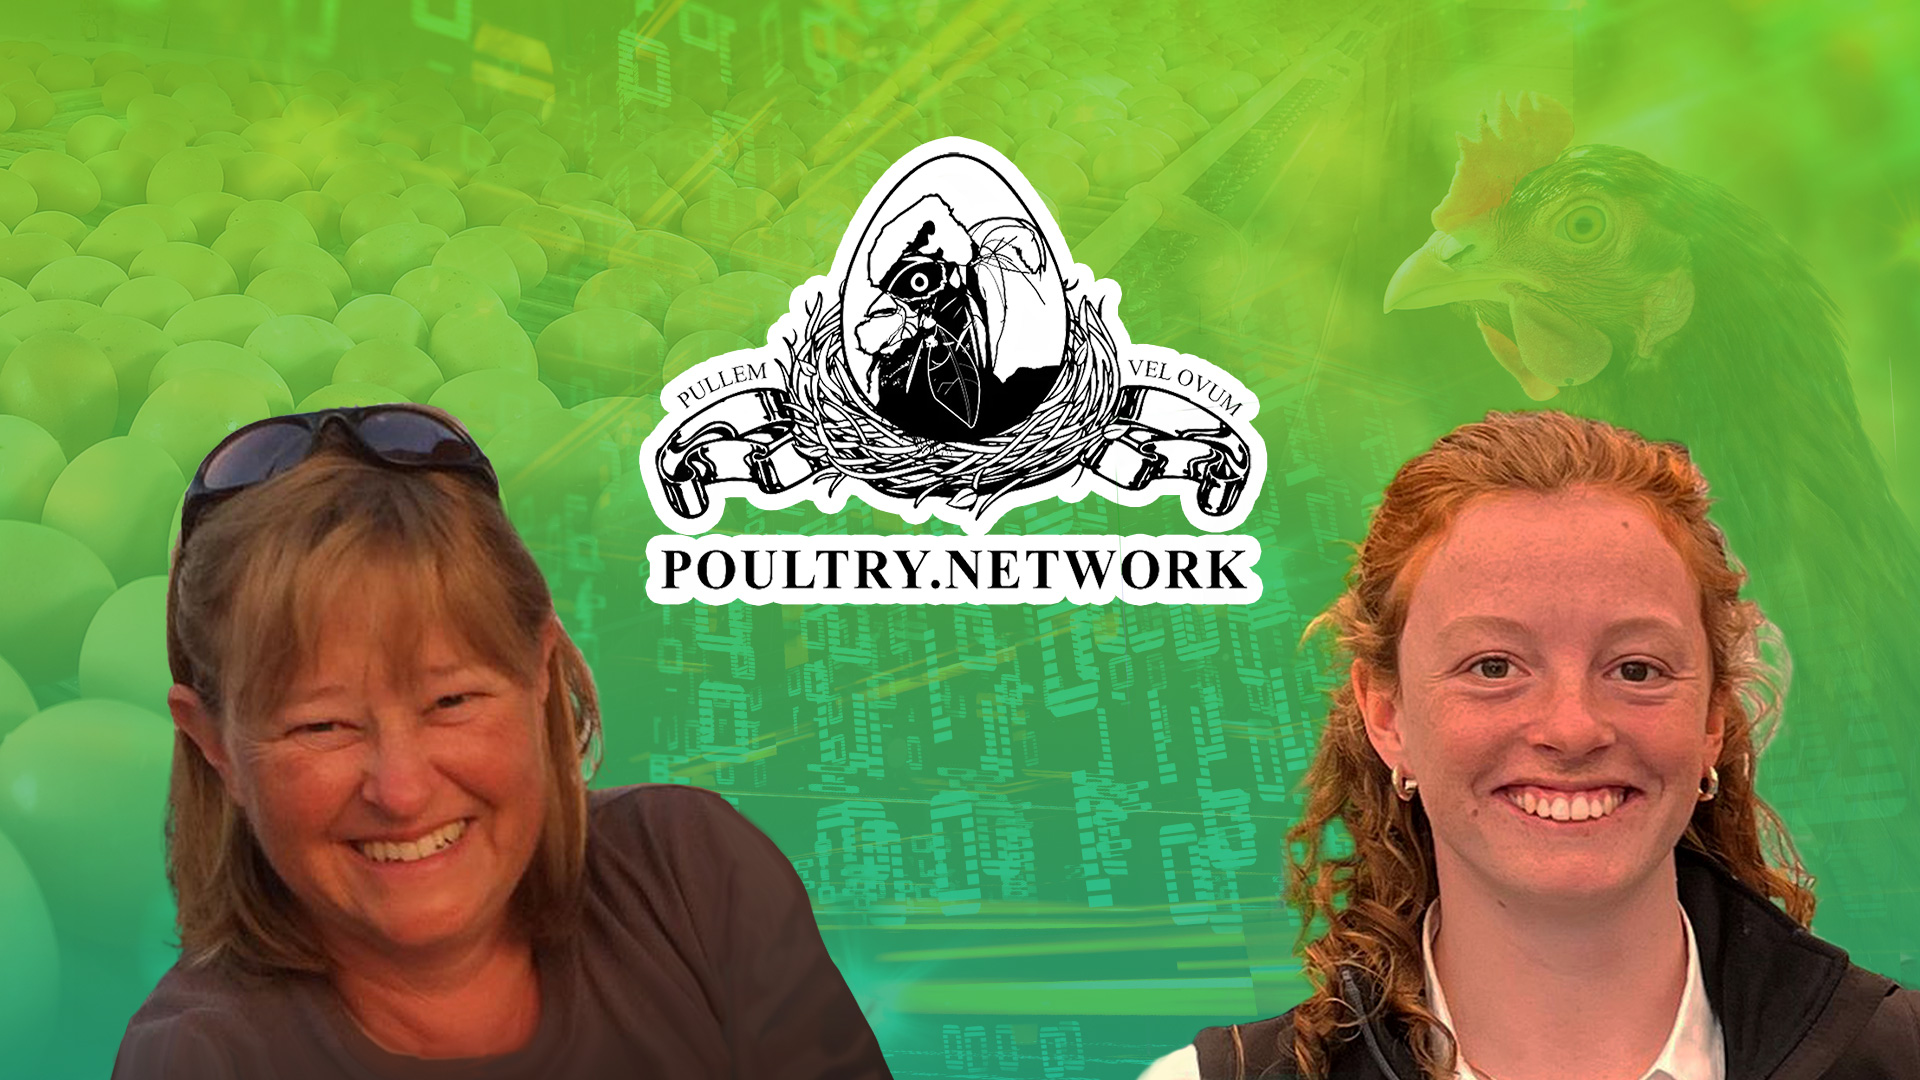 Meet Us at the POULTRY.NETWORK Conference